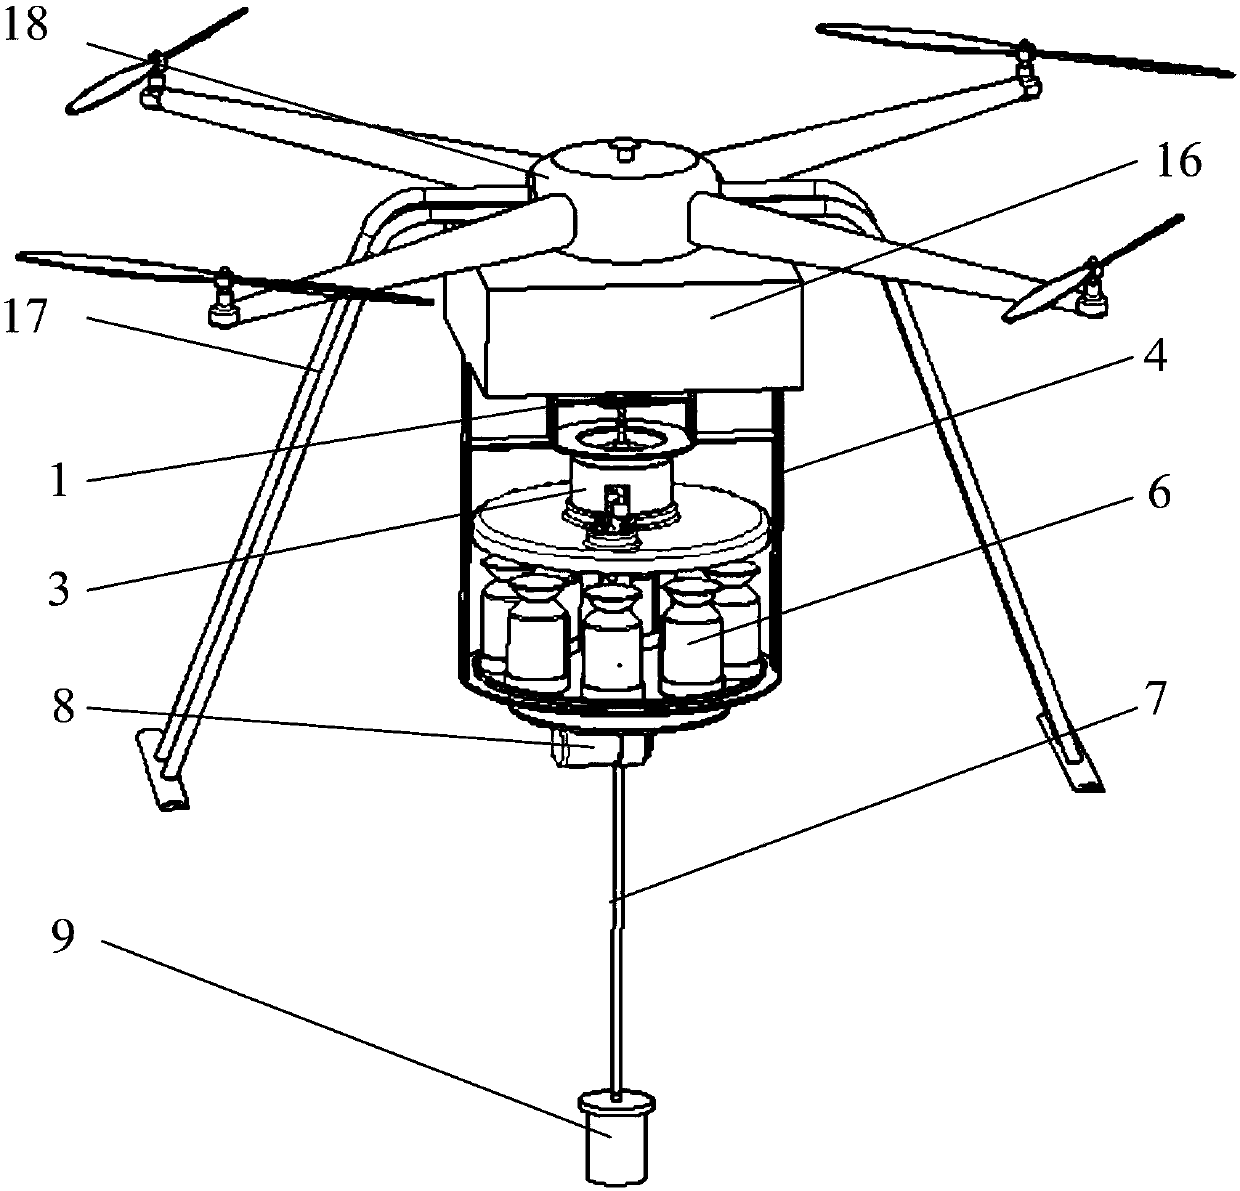 Unmanned aerial vehicle device for automatic water sampling and sampling method